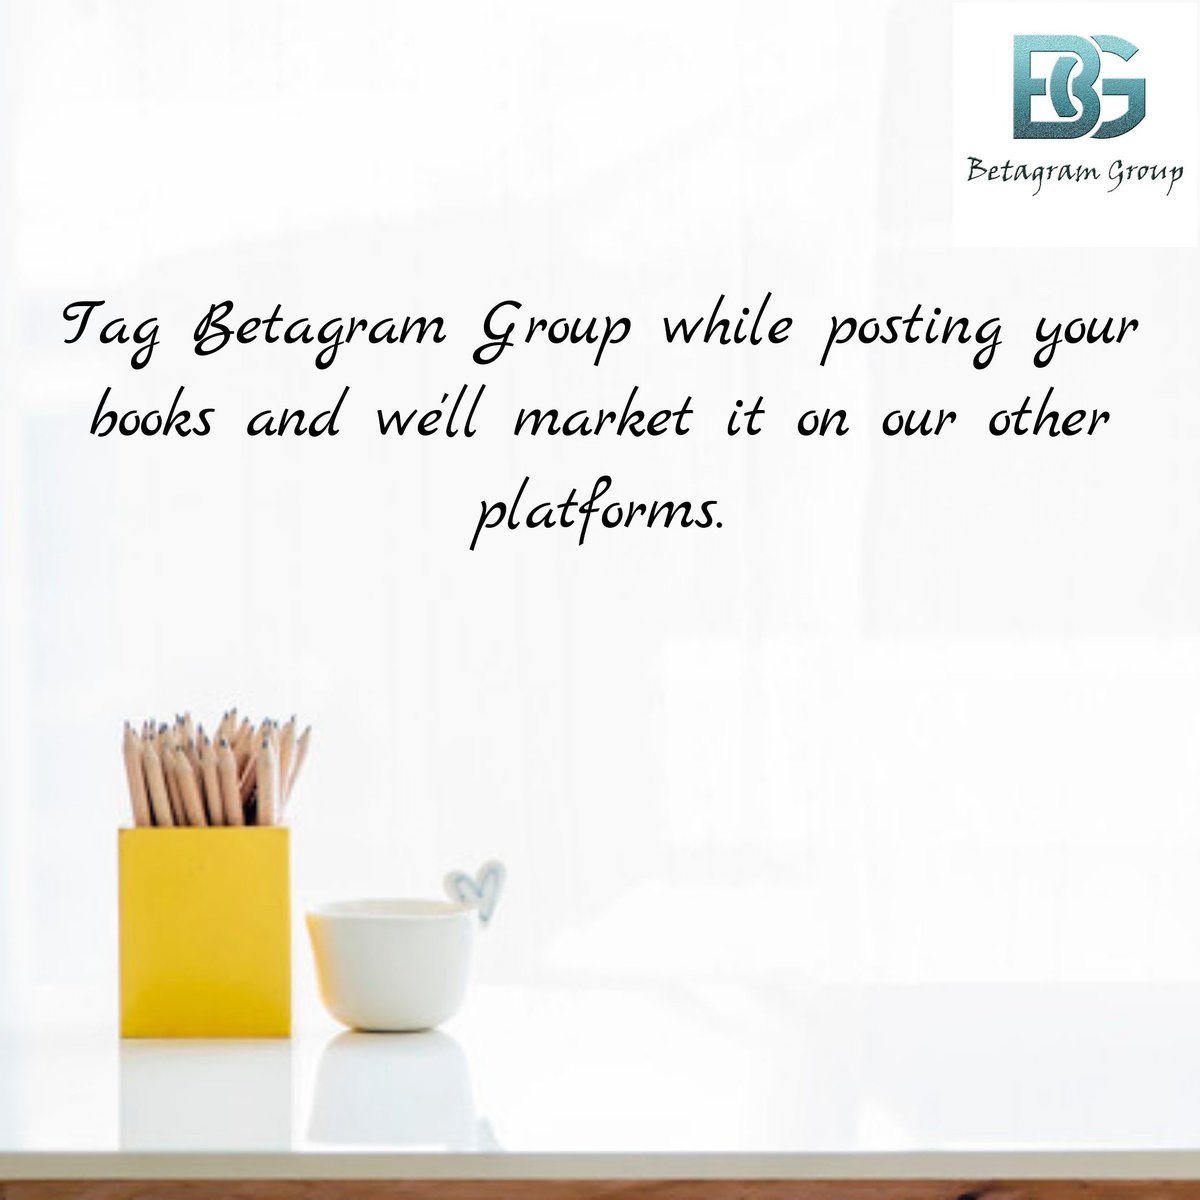 While sharing your books, poetry, blogs tag @betagramgroup and we'll share your links on all of our platform. 
#share #books #blogger #bookservices #writingcommunity #writingservices #writerscommunity #Writers #writebooks #poet #poetry #blogs #betagramgroup #weekendvibes #weekend